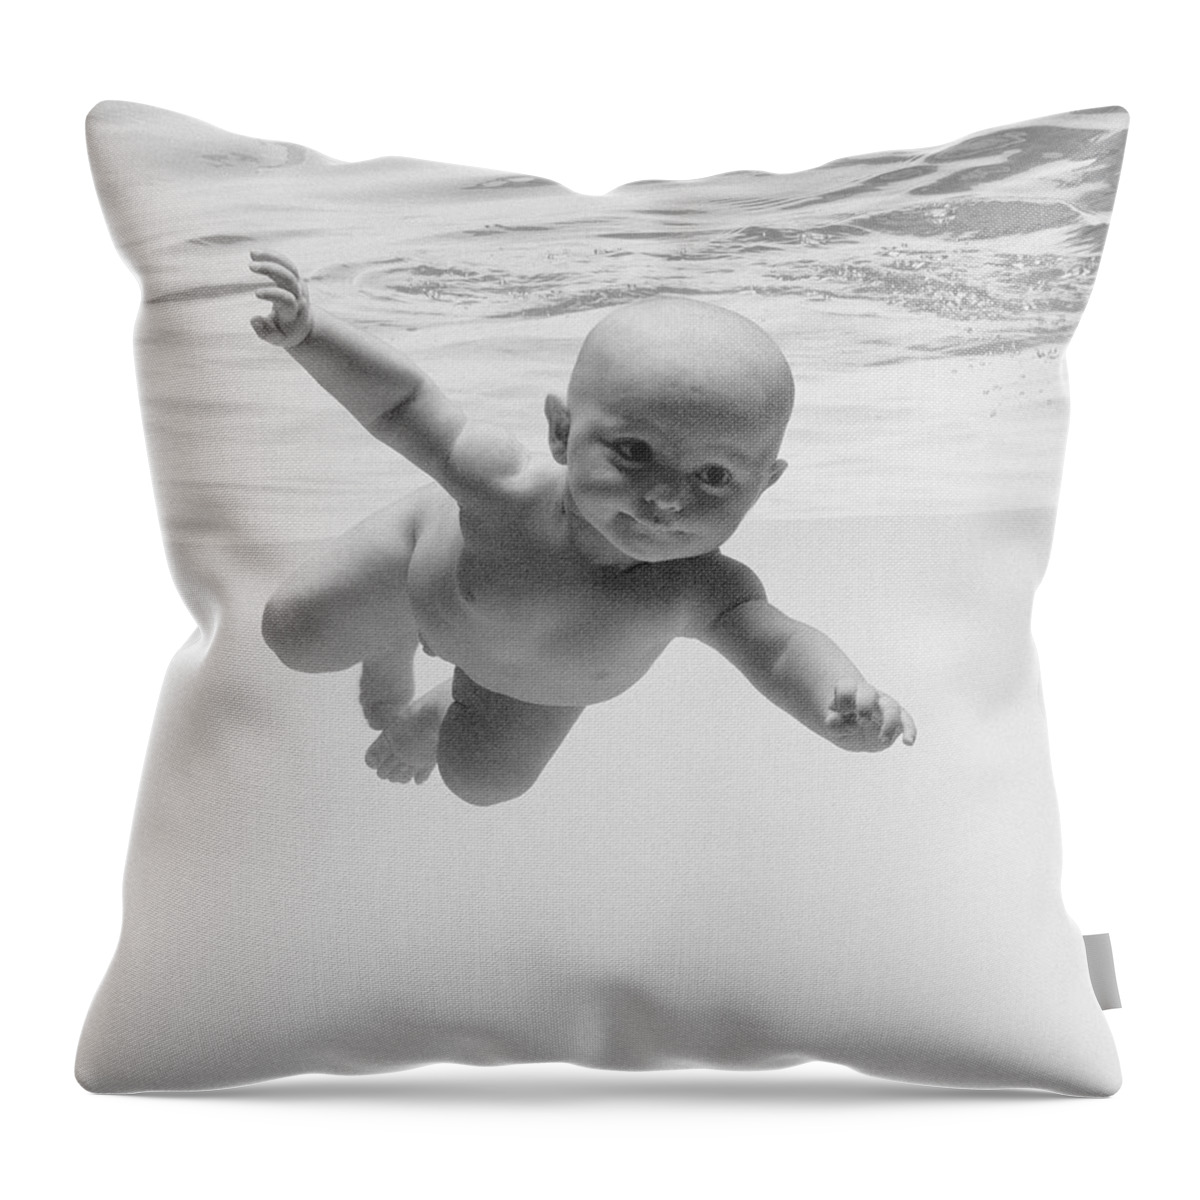 Underwater Throw Pillow featuring the photograph Baby 6-9 Months Swimming, Underwater by Ray Massey